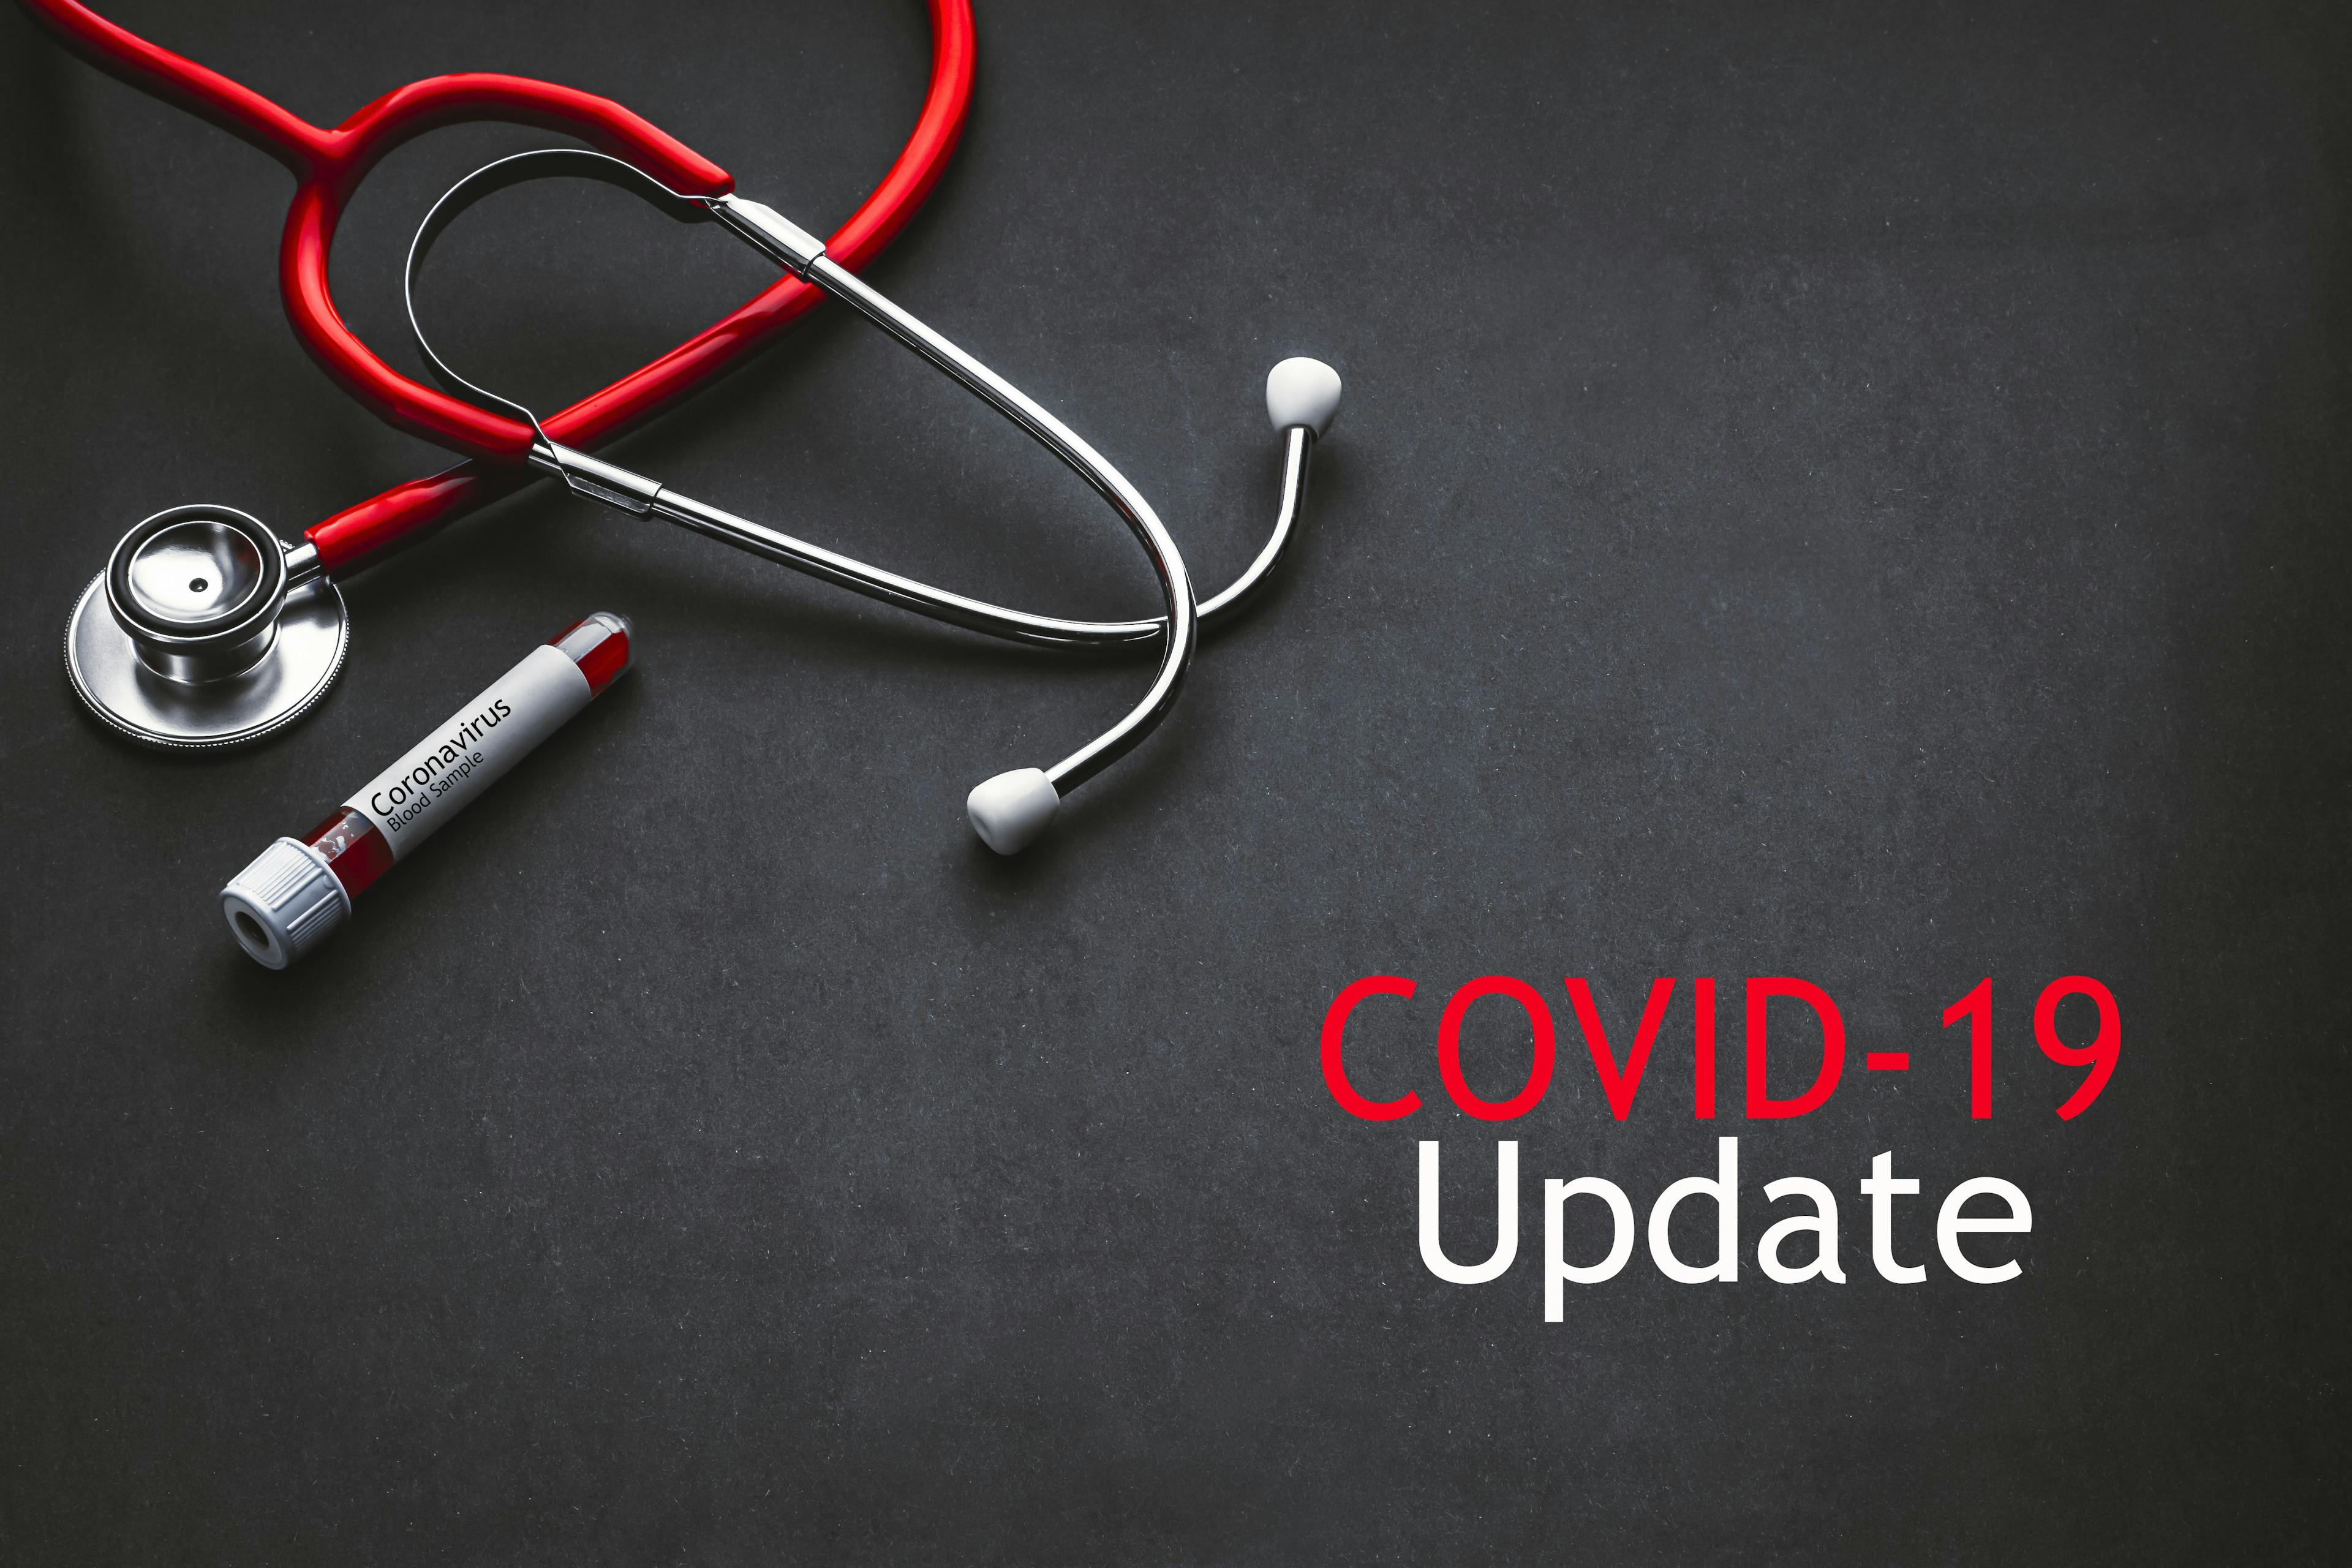 COVID-19 Update: Global Cases and Recoveries as of June 29, 2020